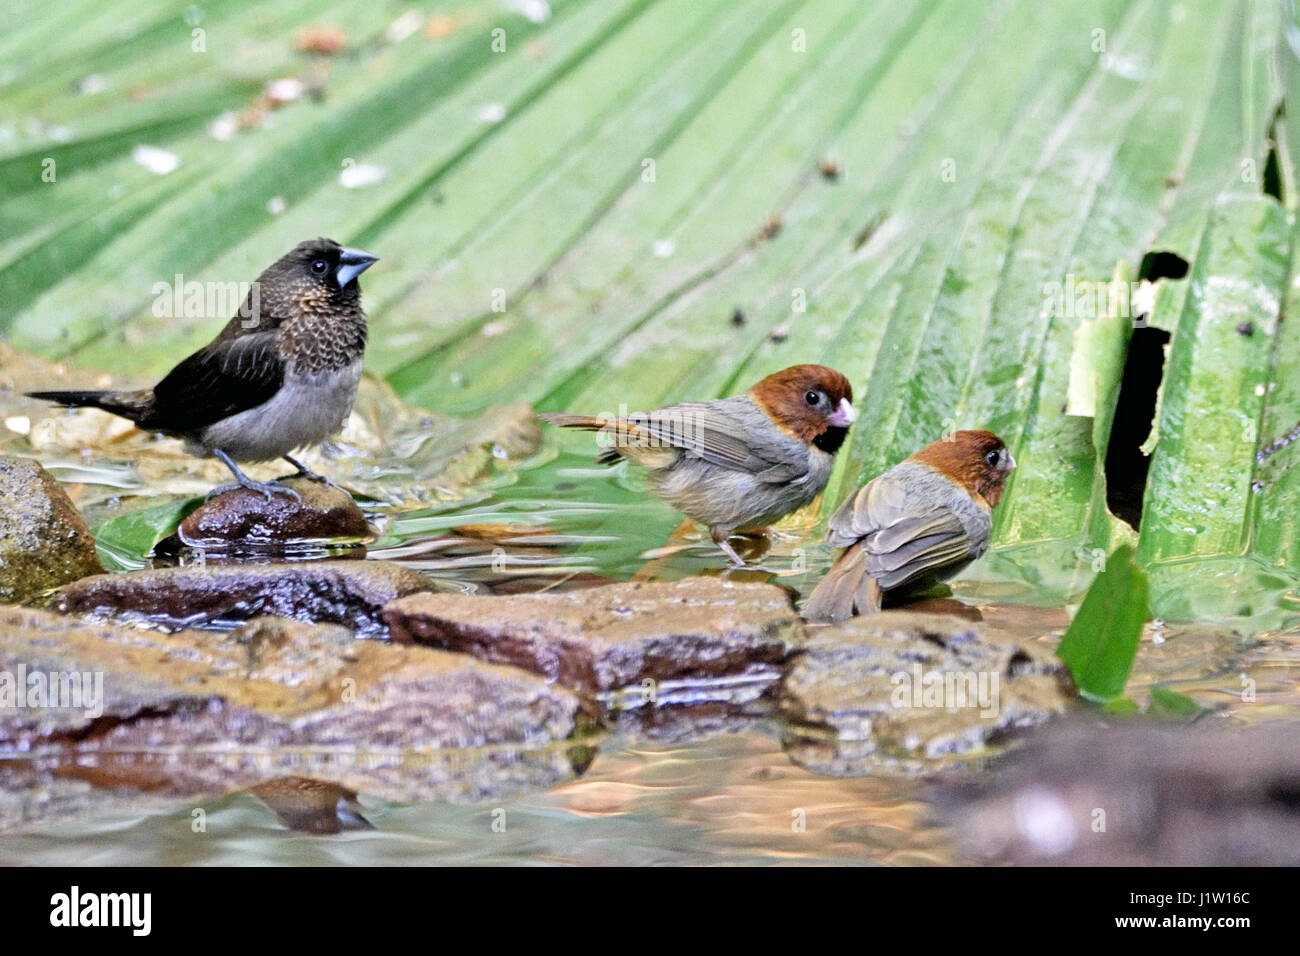 A pair of Short-tailed Parrotbills (Paradoxornis davidianus) and a White-rumped Munia (Lonchura striata) standing by a shollow stream in the forest in Stock Photo